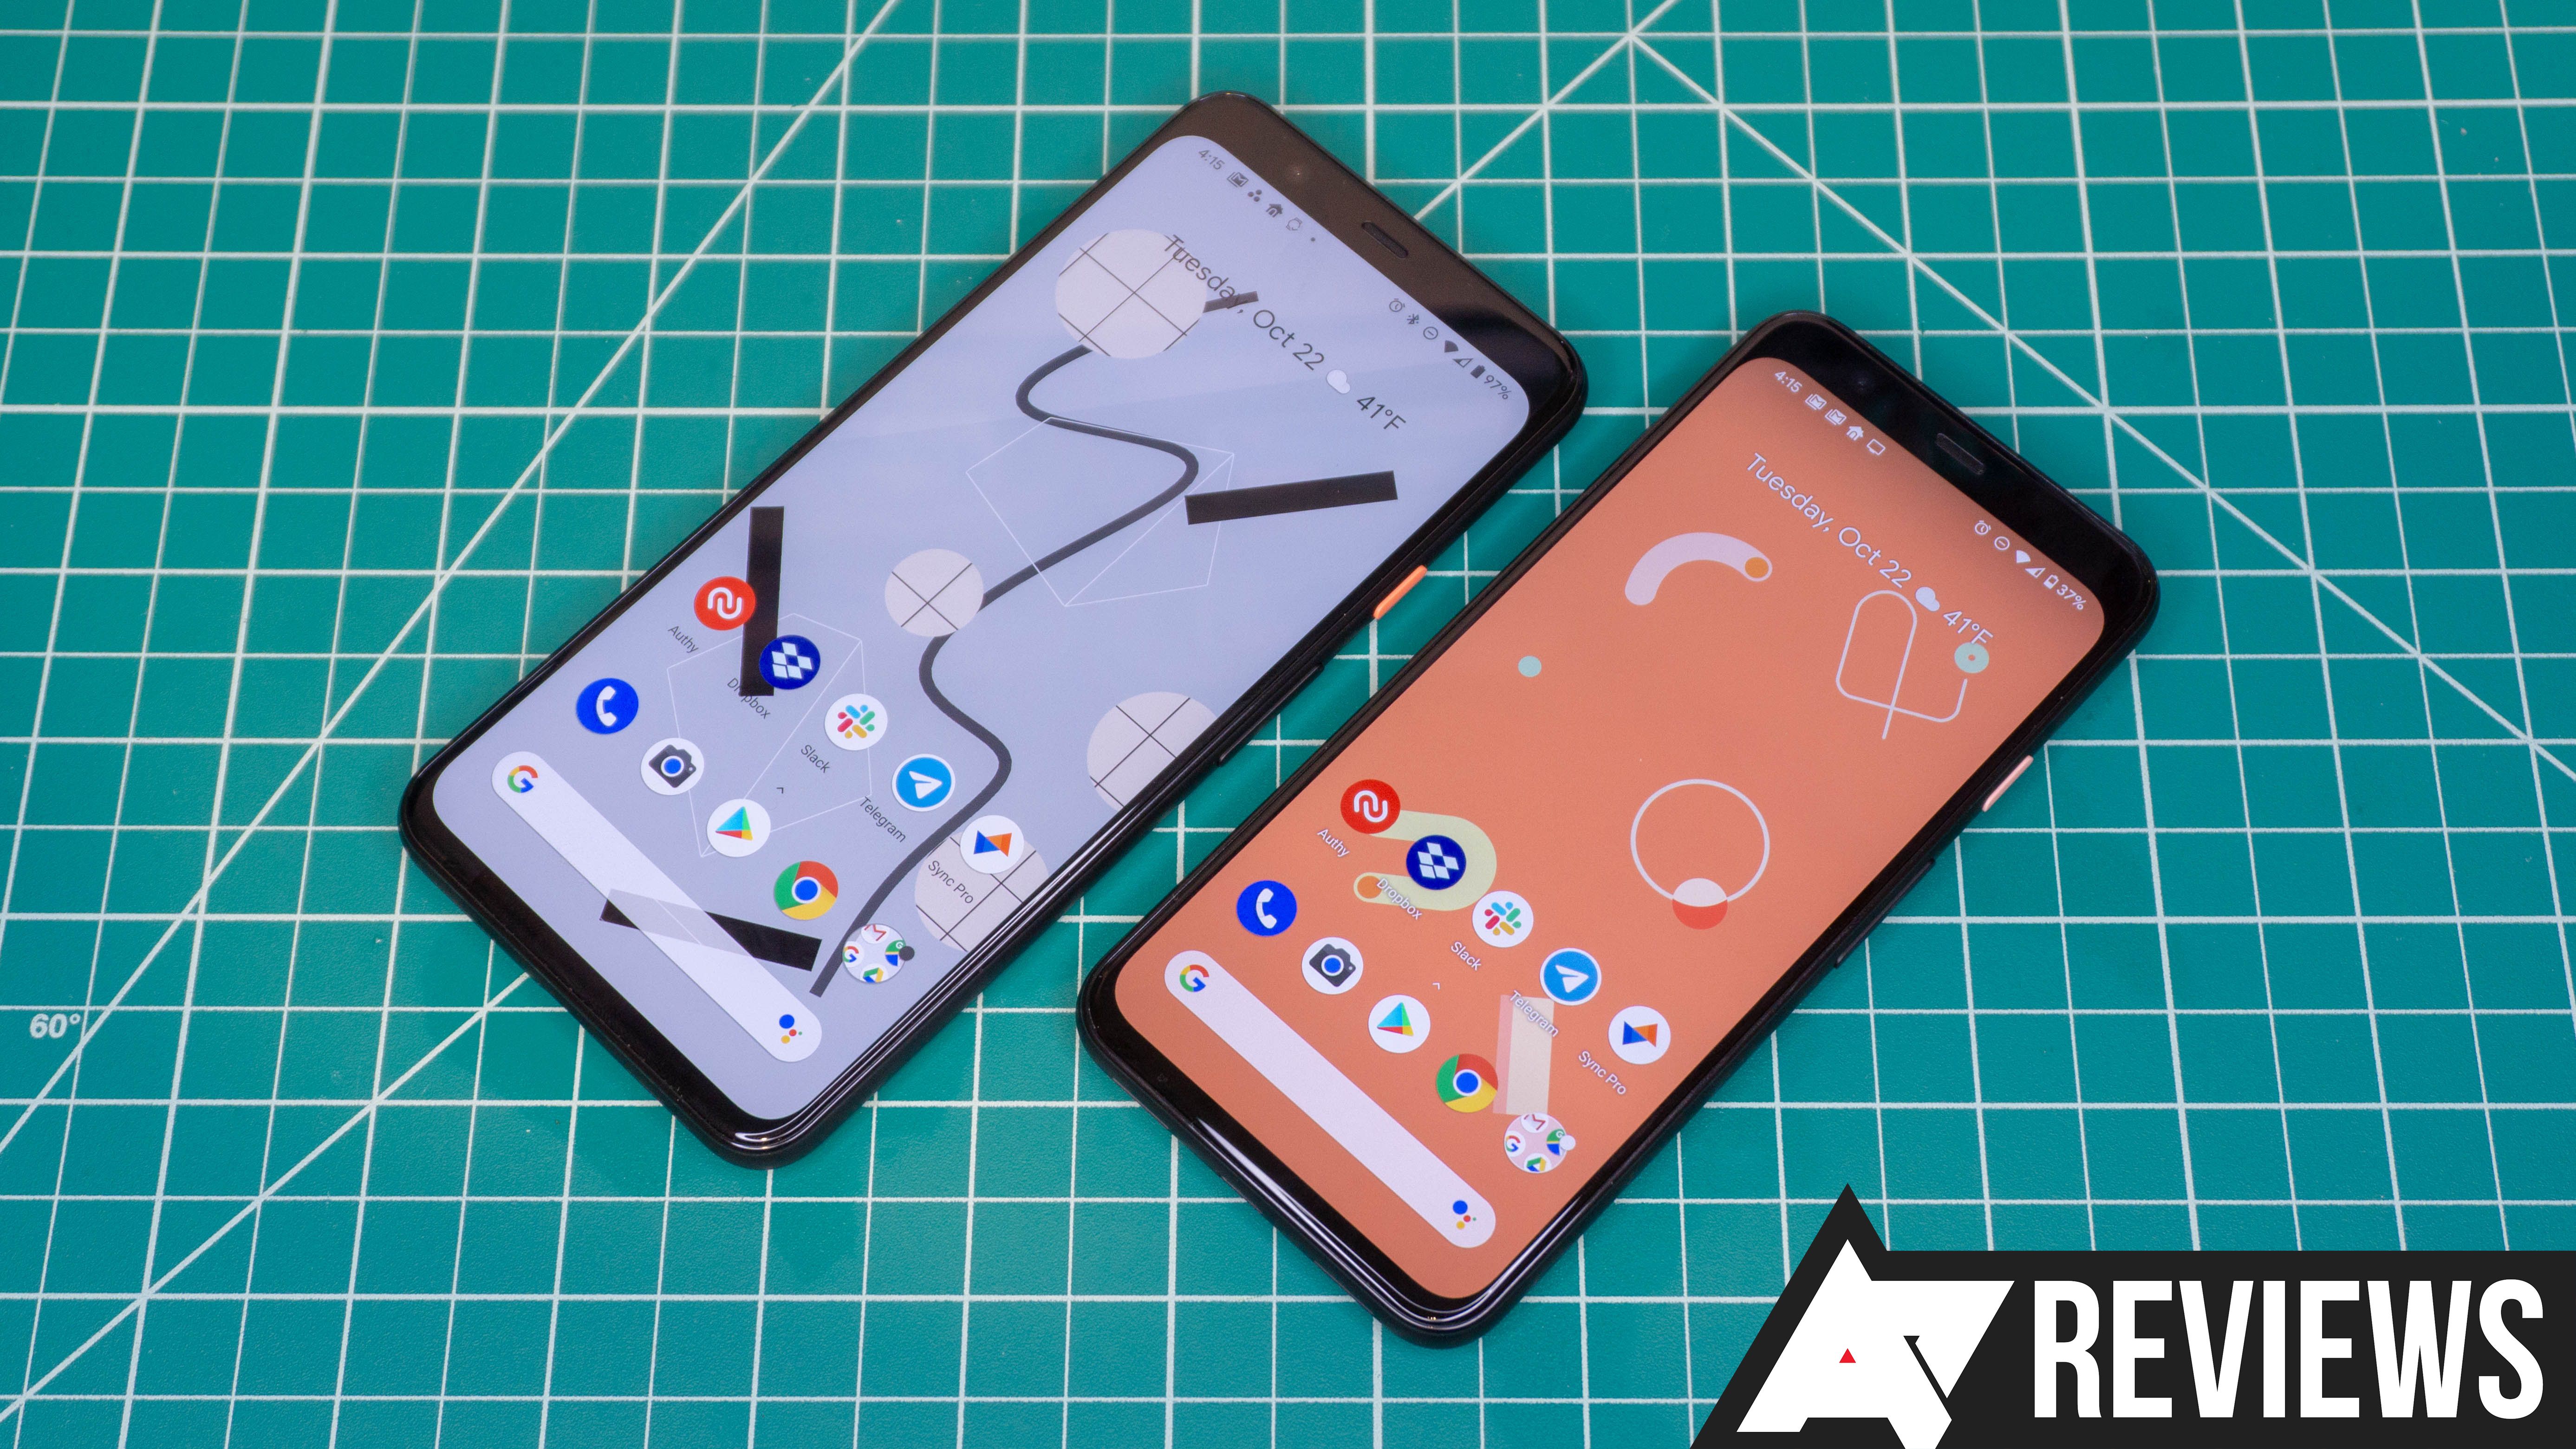 A Google Pixel 4 and 4 XL next to each other on a green grided mat